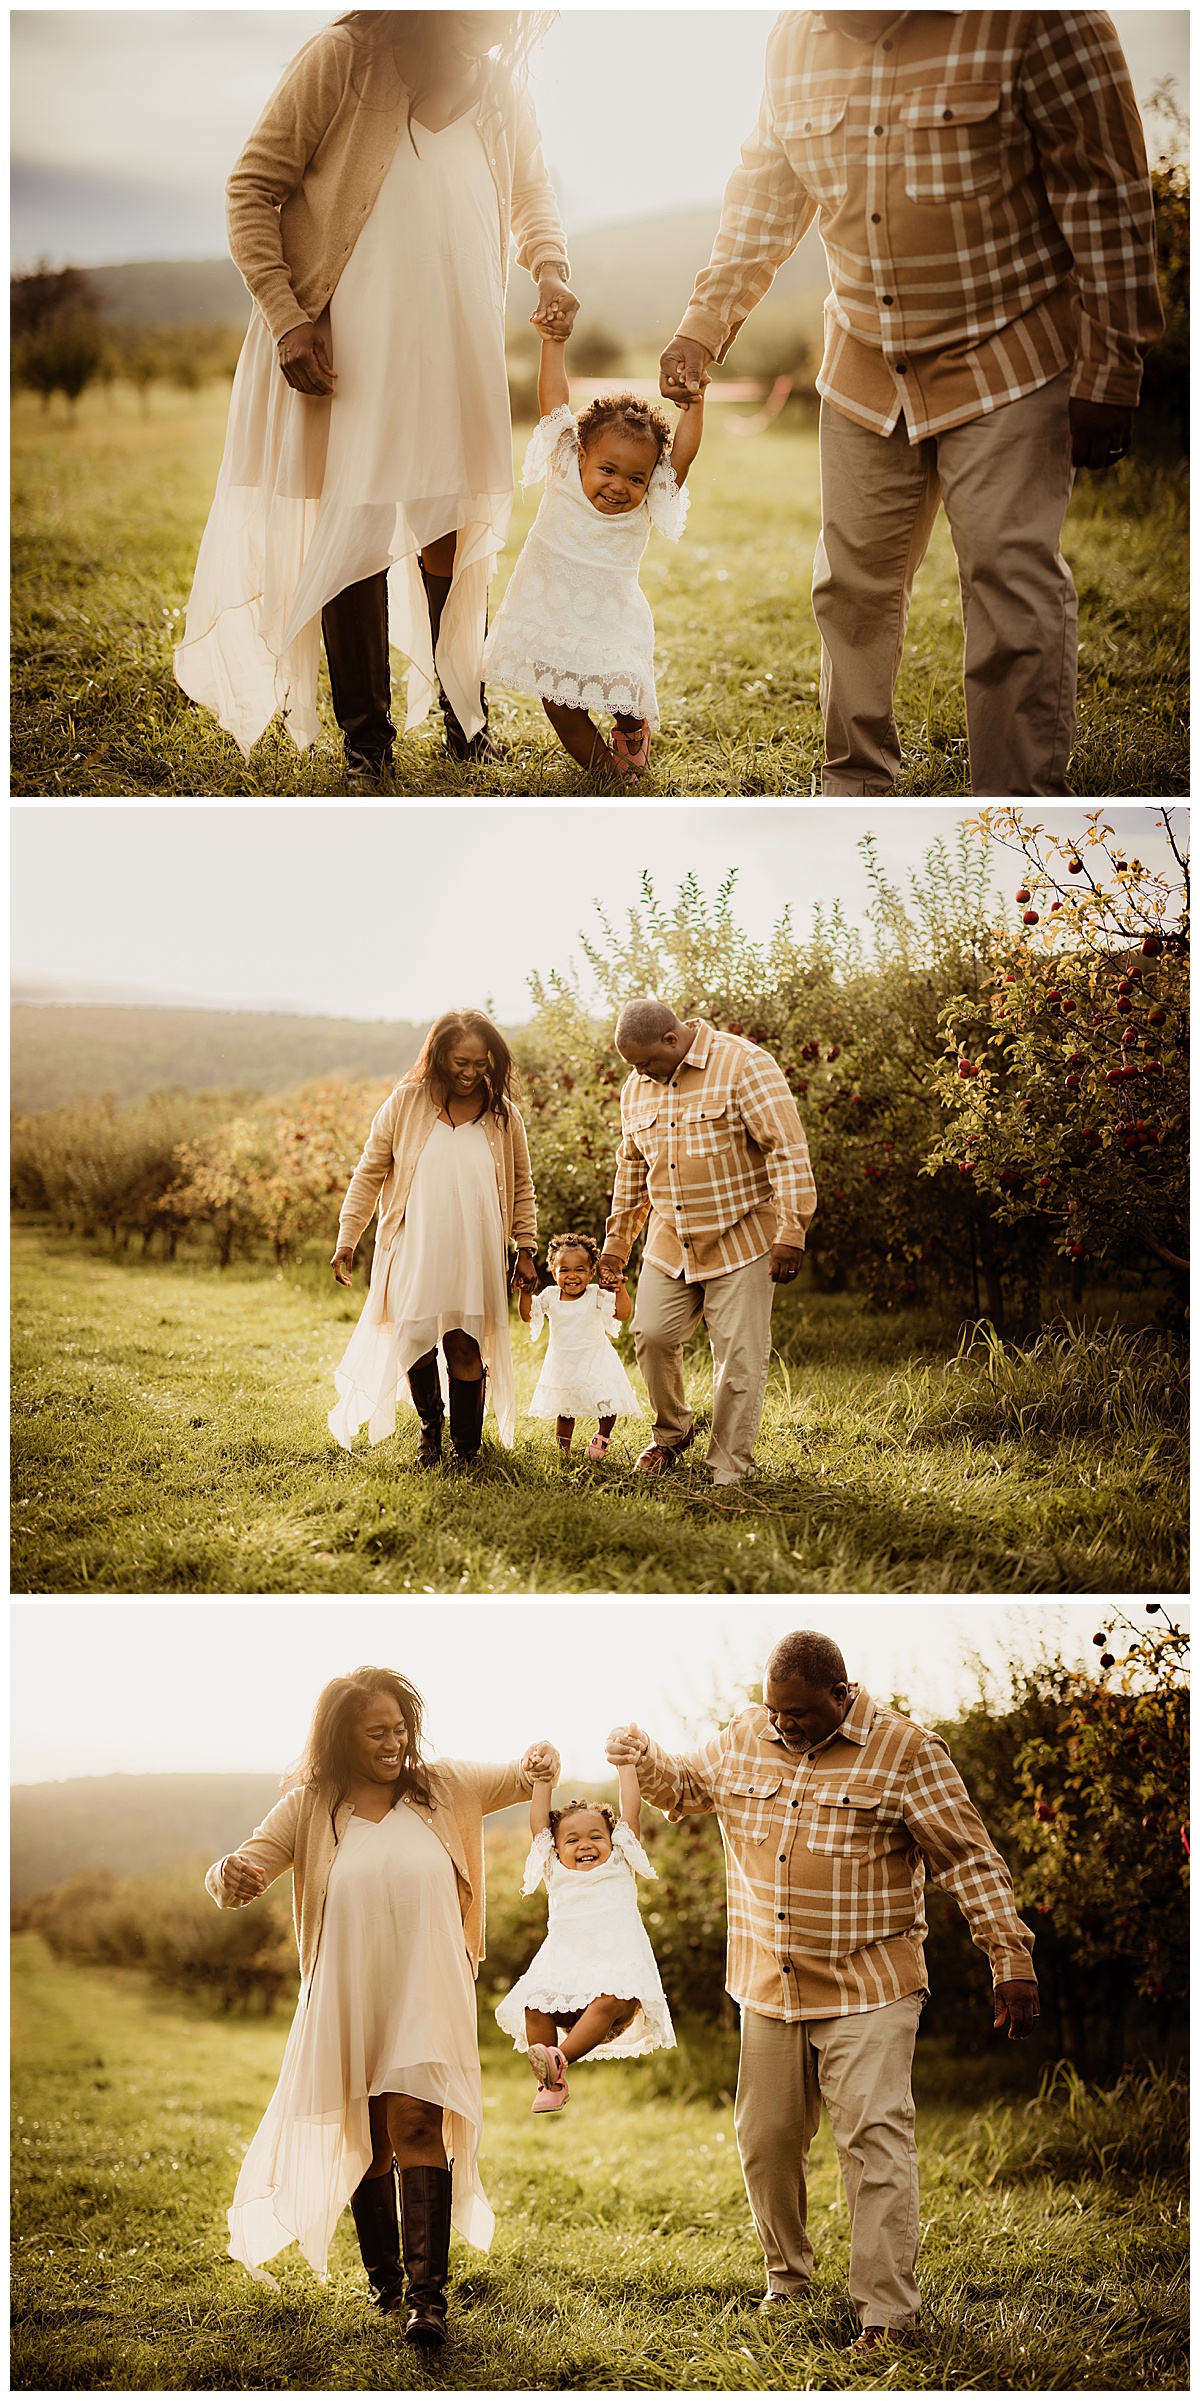 Family walks together during their Outdoor Adventure Golden Hour Session at Great Country Farms